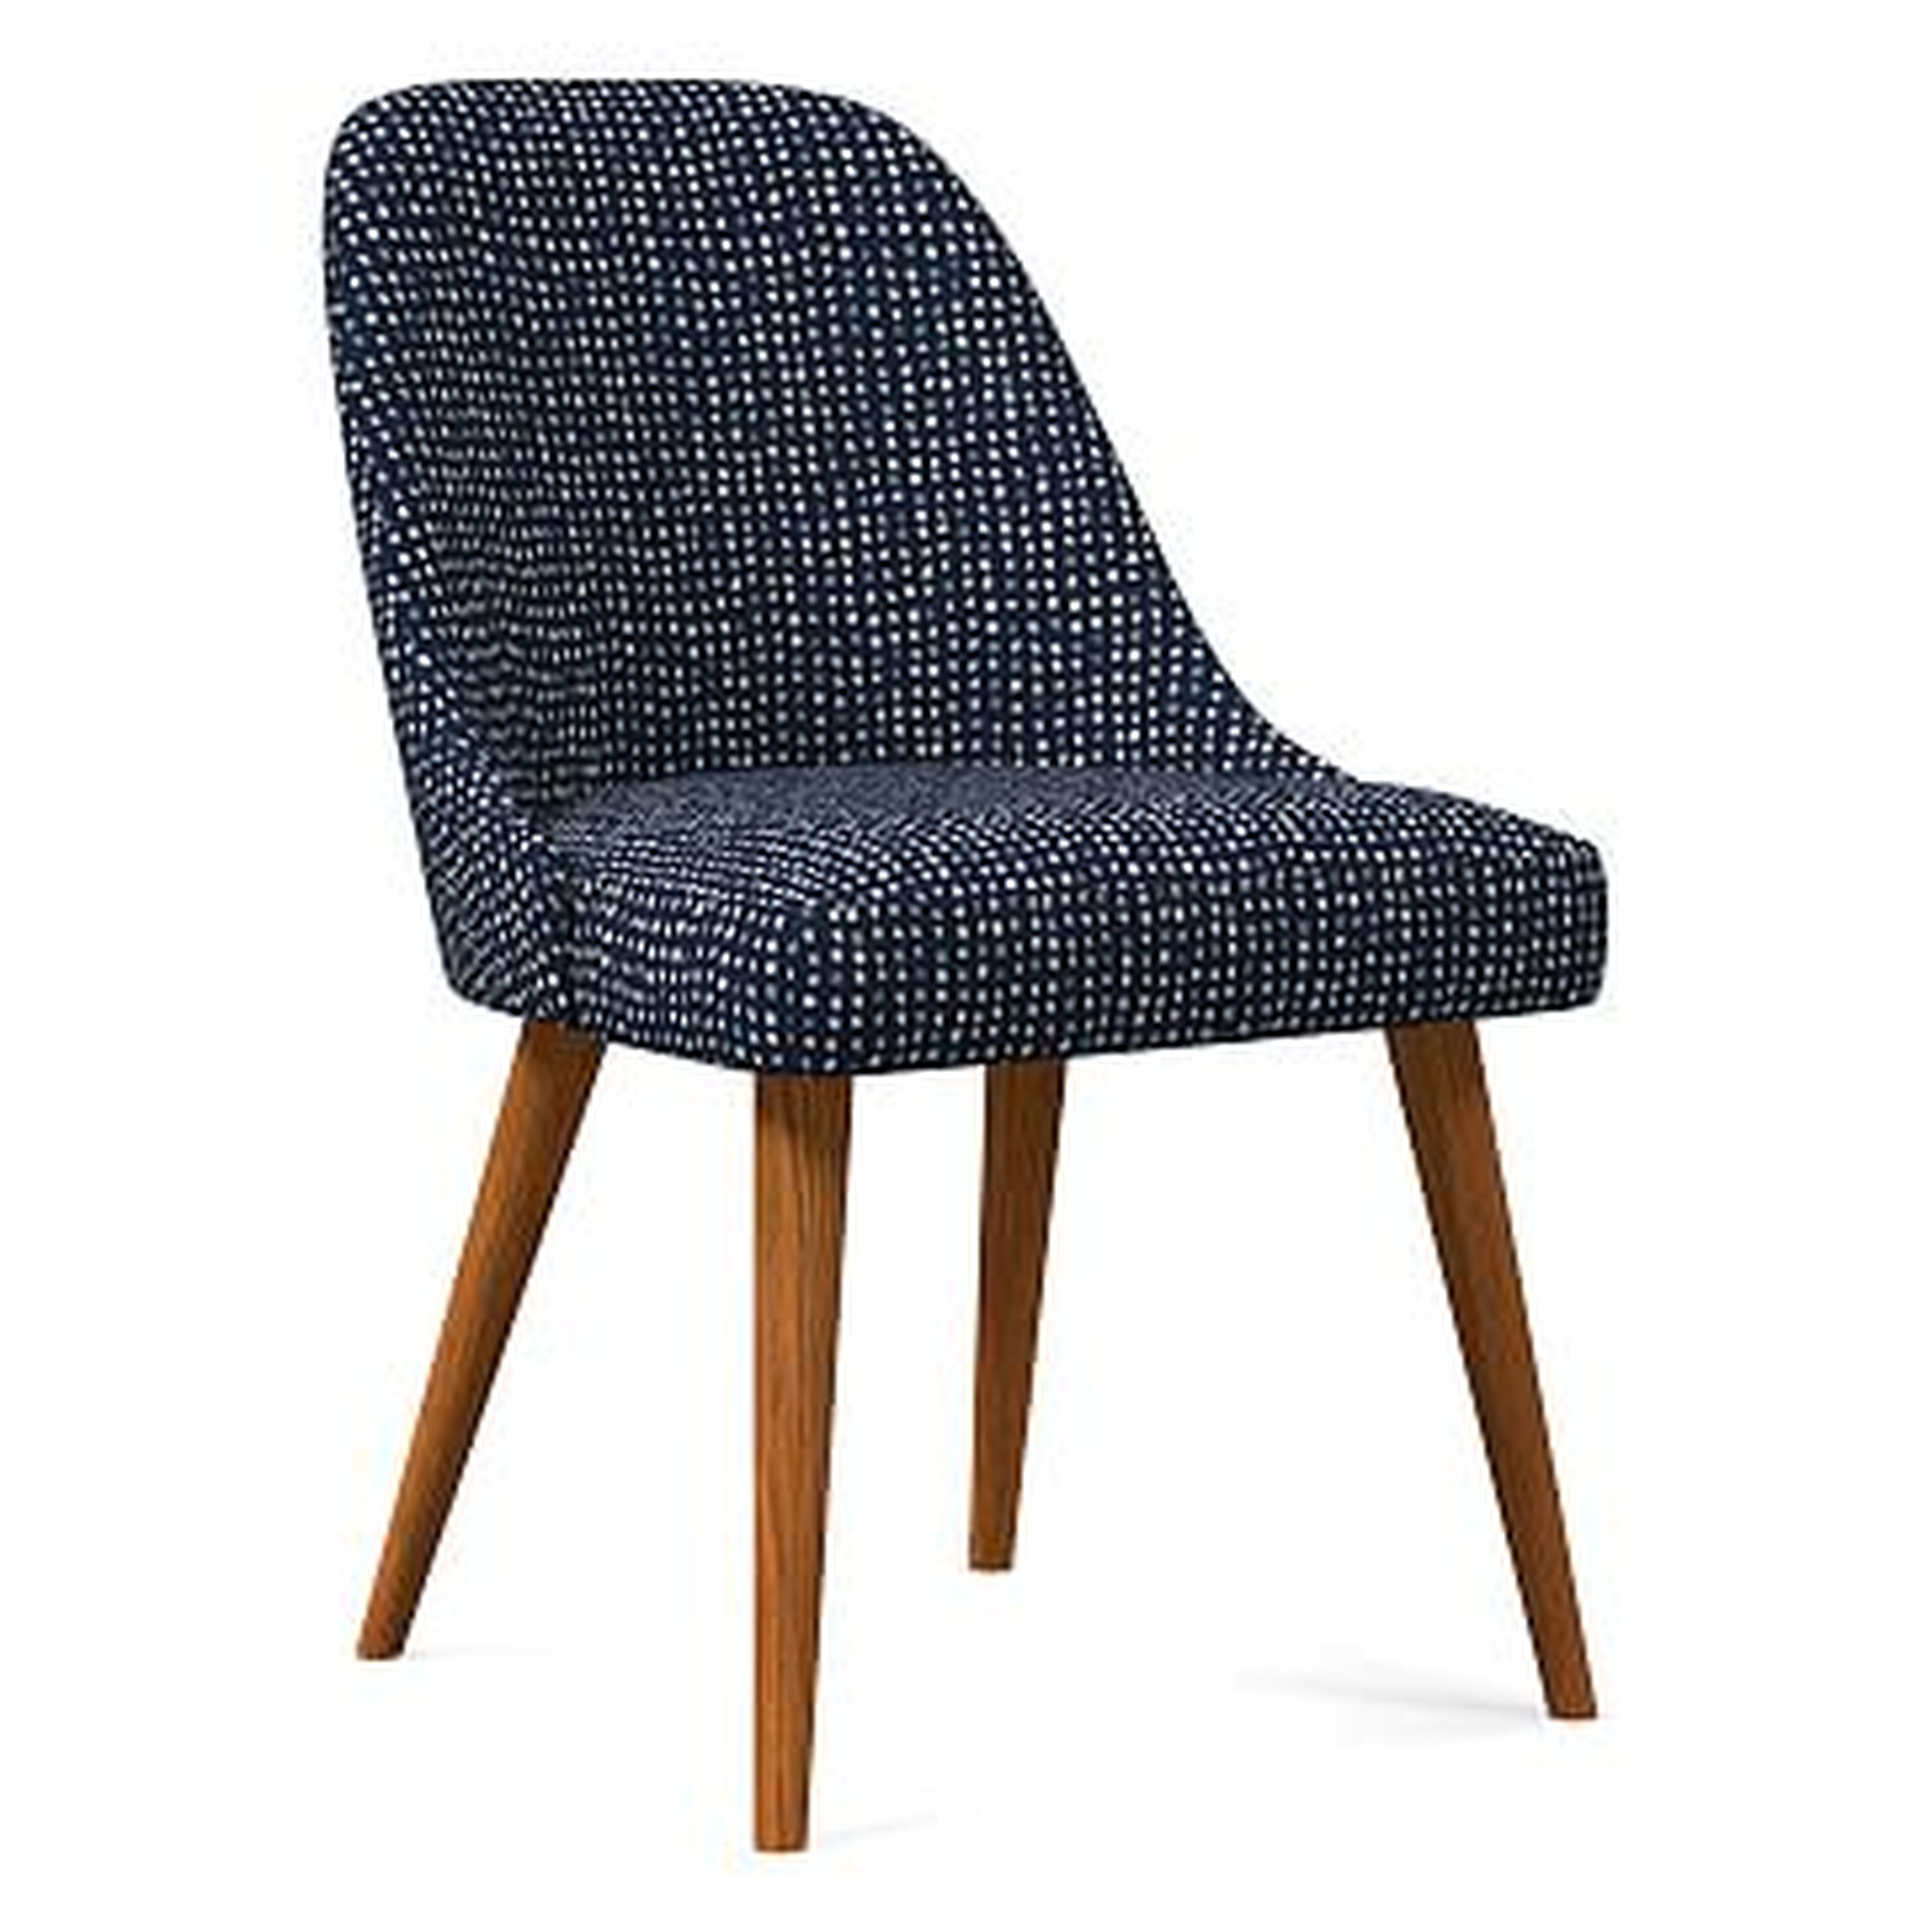 Mid-Century Upholstered Dining Chair, Drawn Dots, Indigo, Pecan - West Elm